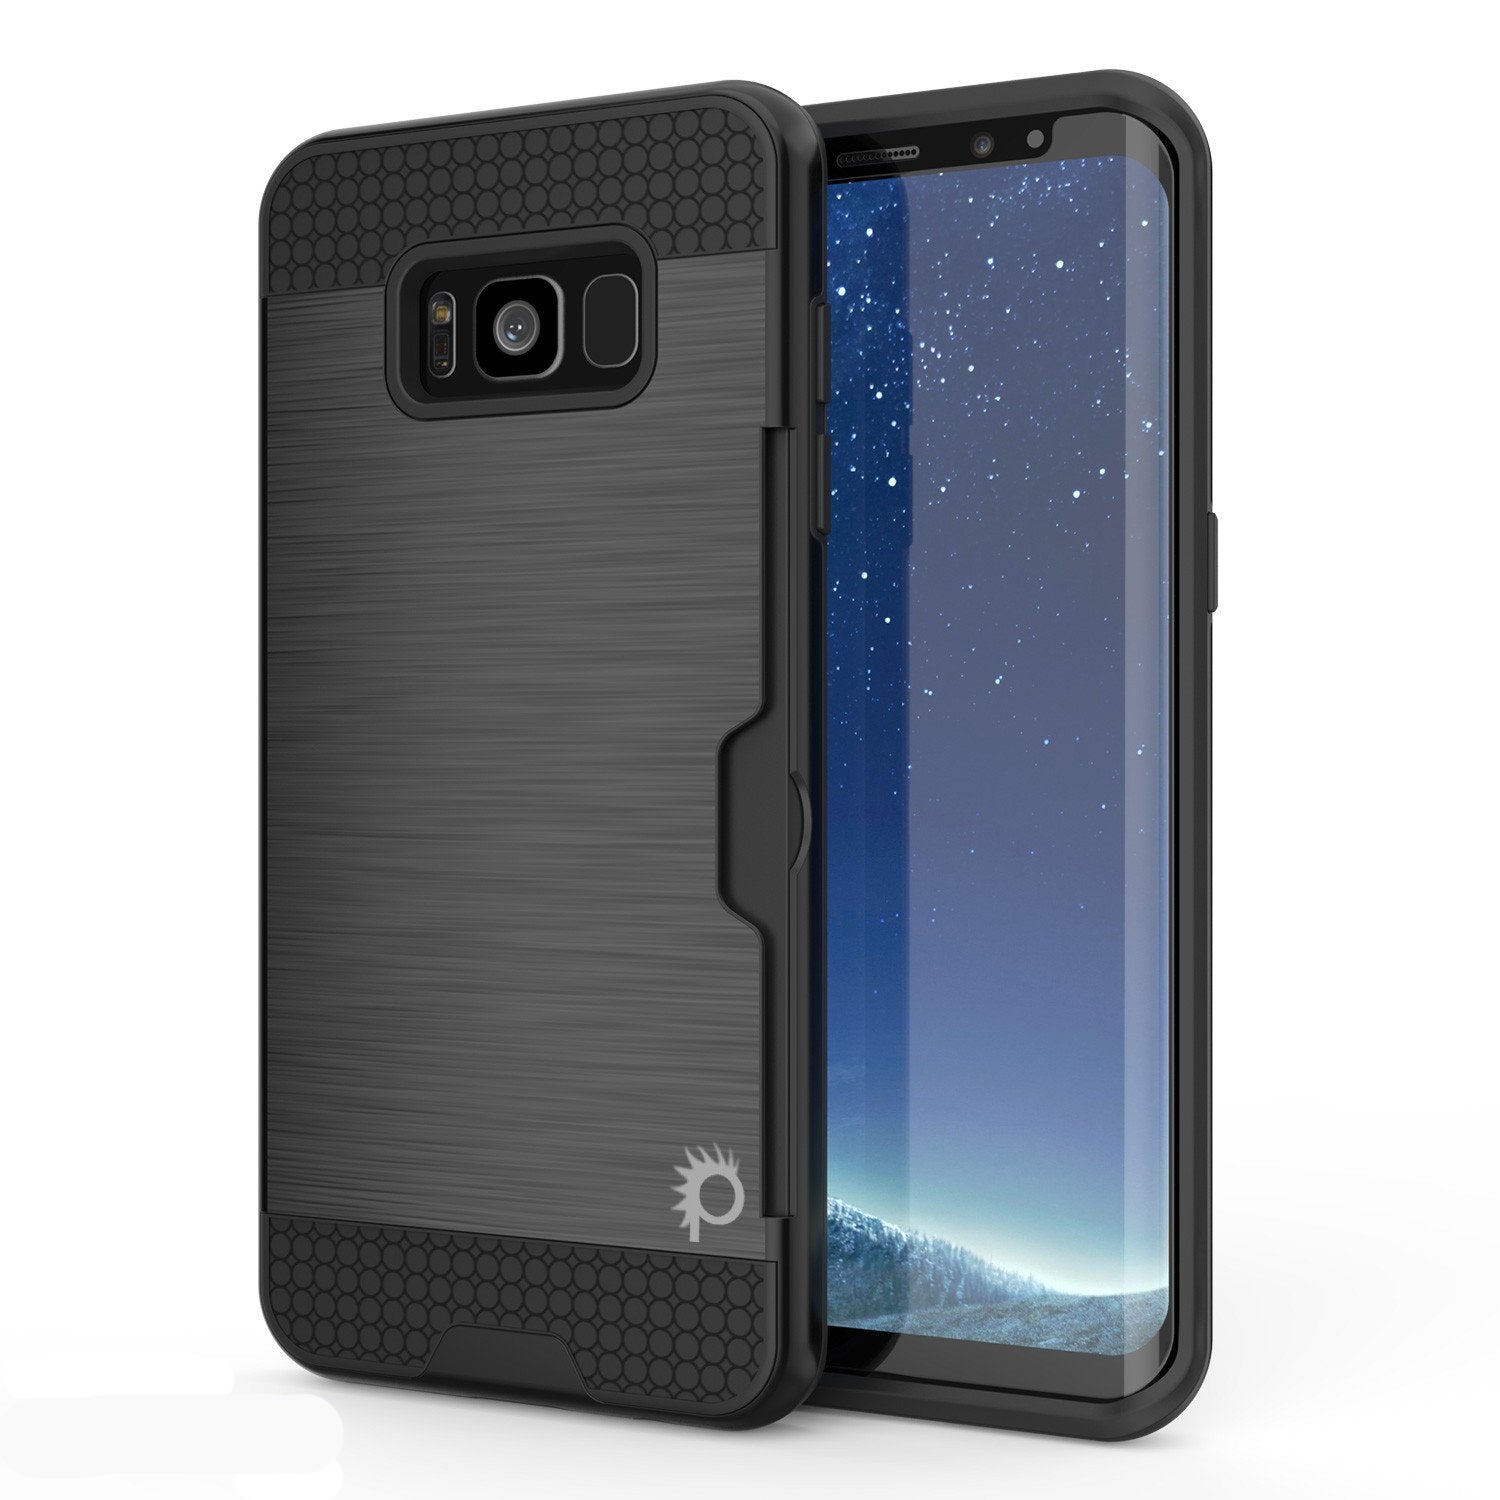 Galaxy S8 Case, PUNKcase [SLOT Series] Dual-Layer Armor Cover w/Integrated Anti-Shock System, Credit Card Slot & Screen Protector [Black]